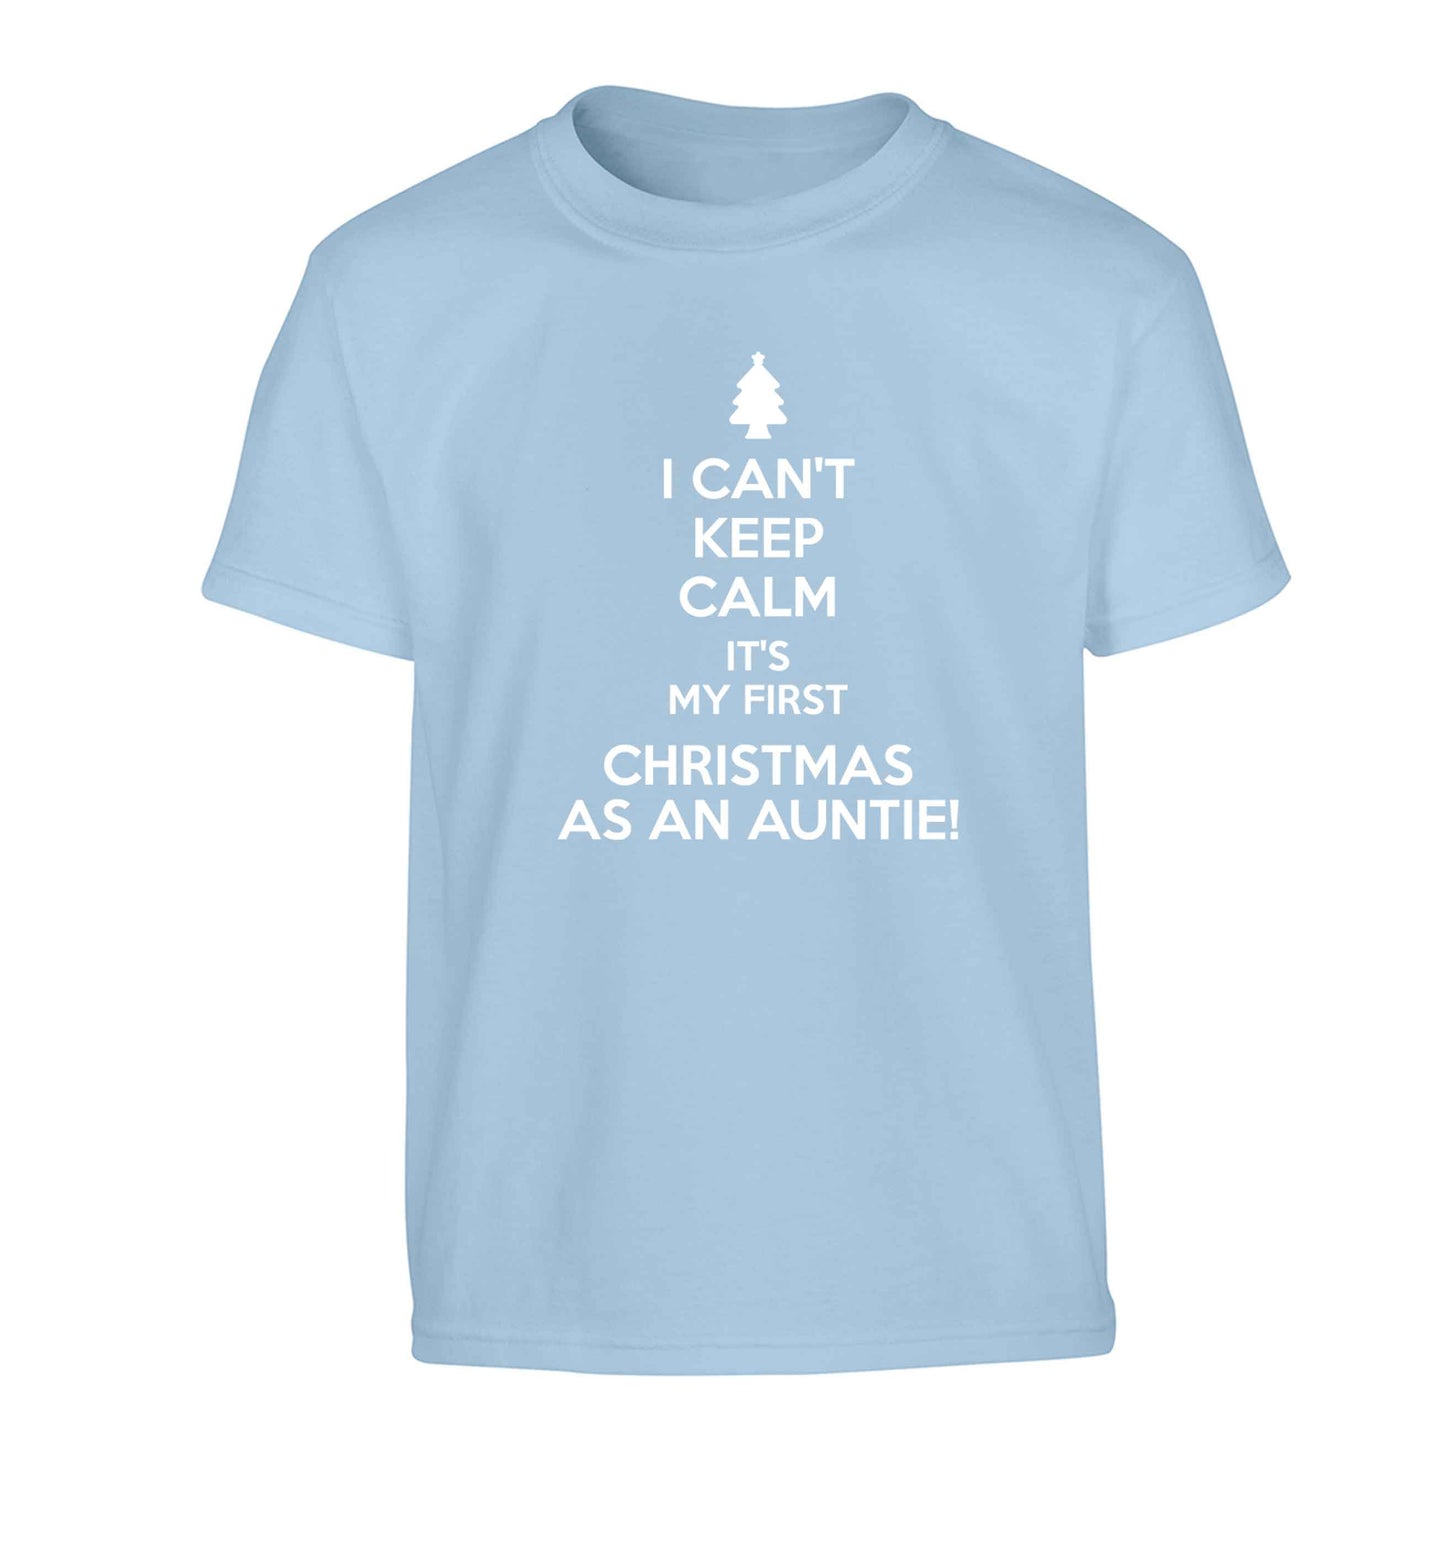 I can't keep calm it's my first Christmas as an auntie! Children's light blue Tshirt 12-13 Years